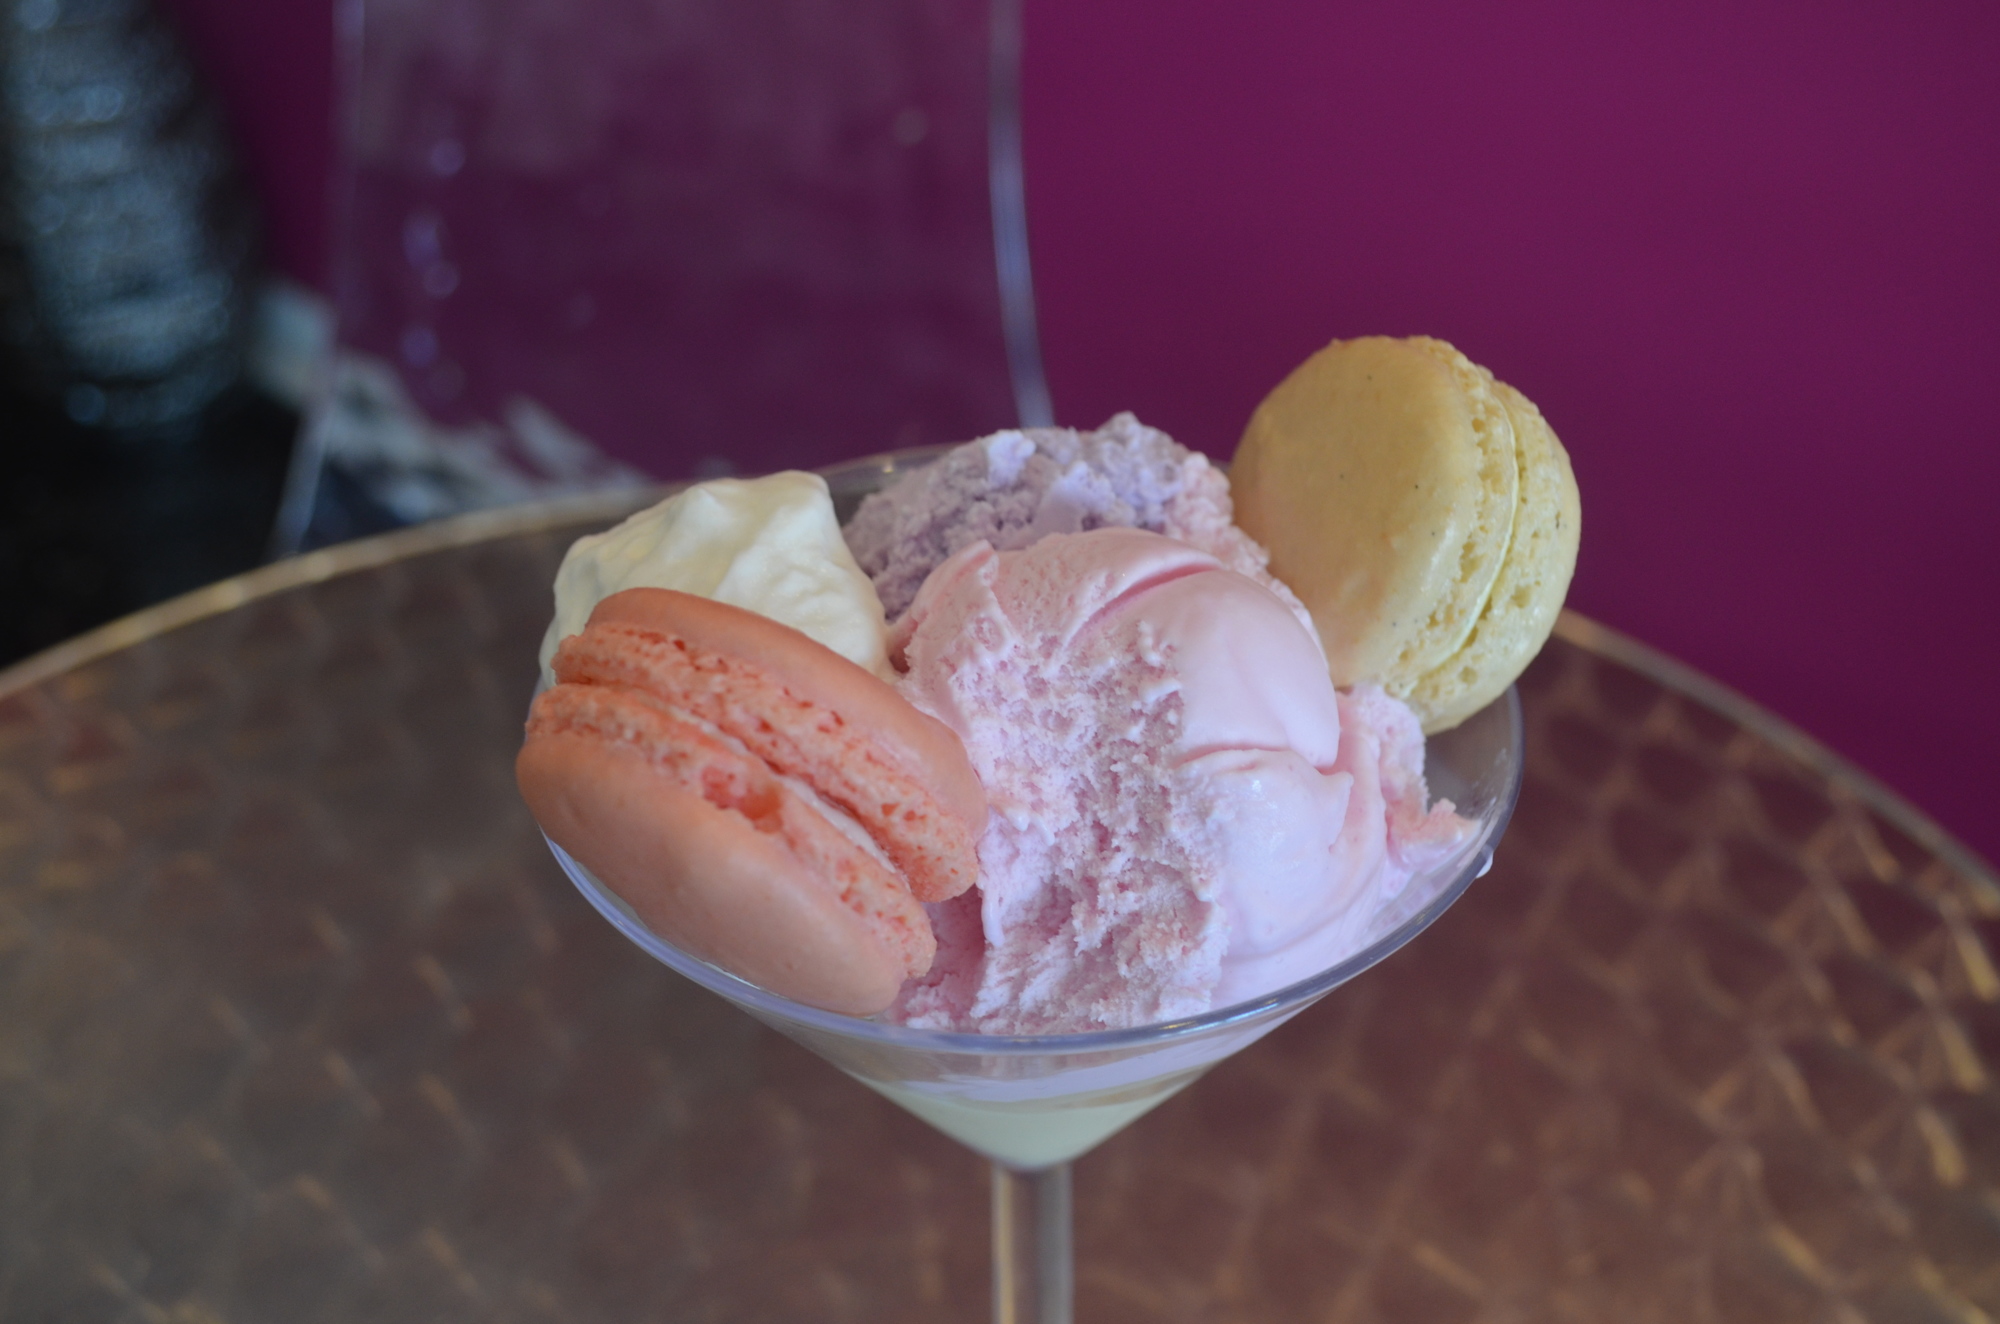 Le Macaron’s gelato sundae, made with violet flower, candy strawberry and vanilla bean gelato flavors, rose petals and Madagascar black vanilla macaroons and whipped cream.